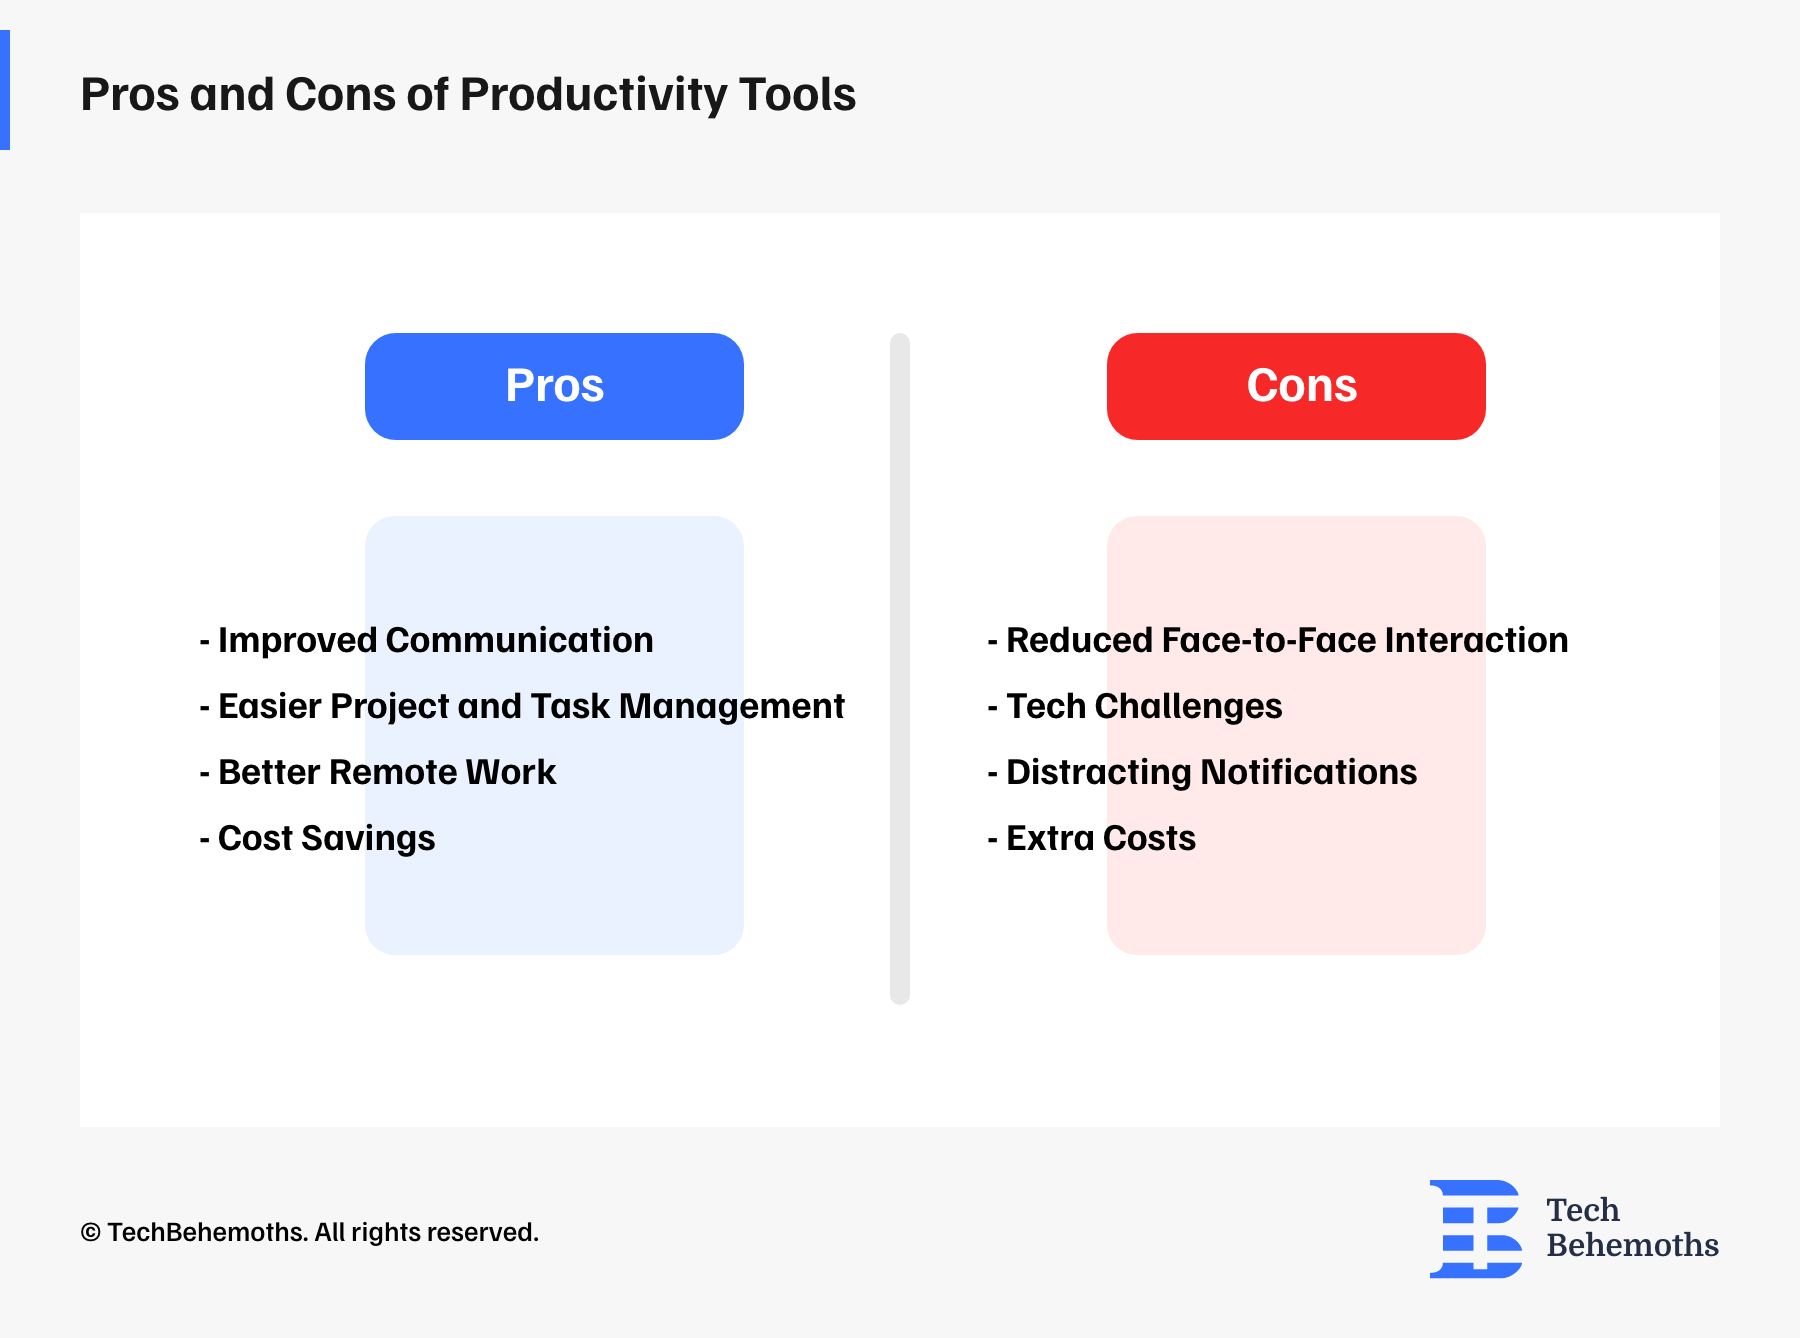 Pros and Cons Productivity Tools